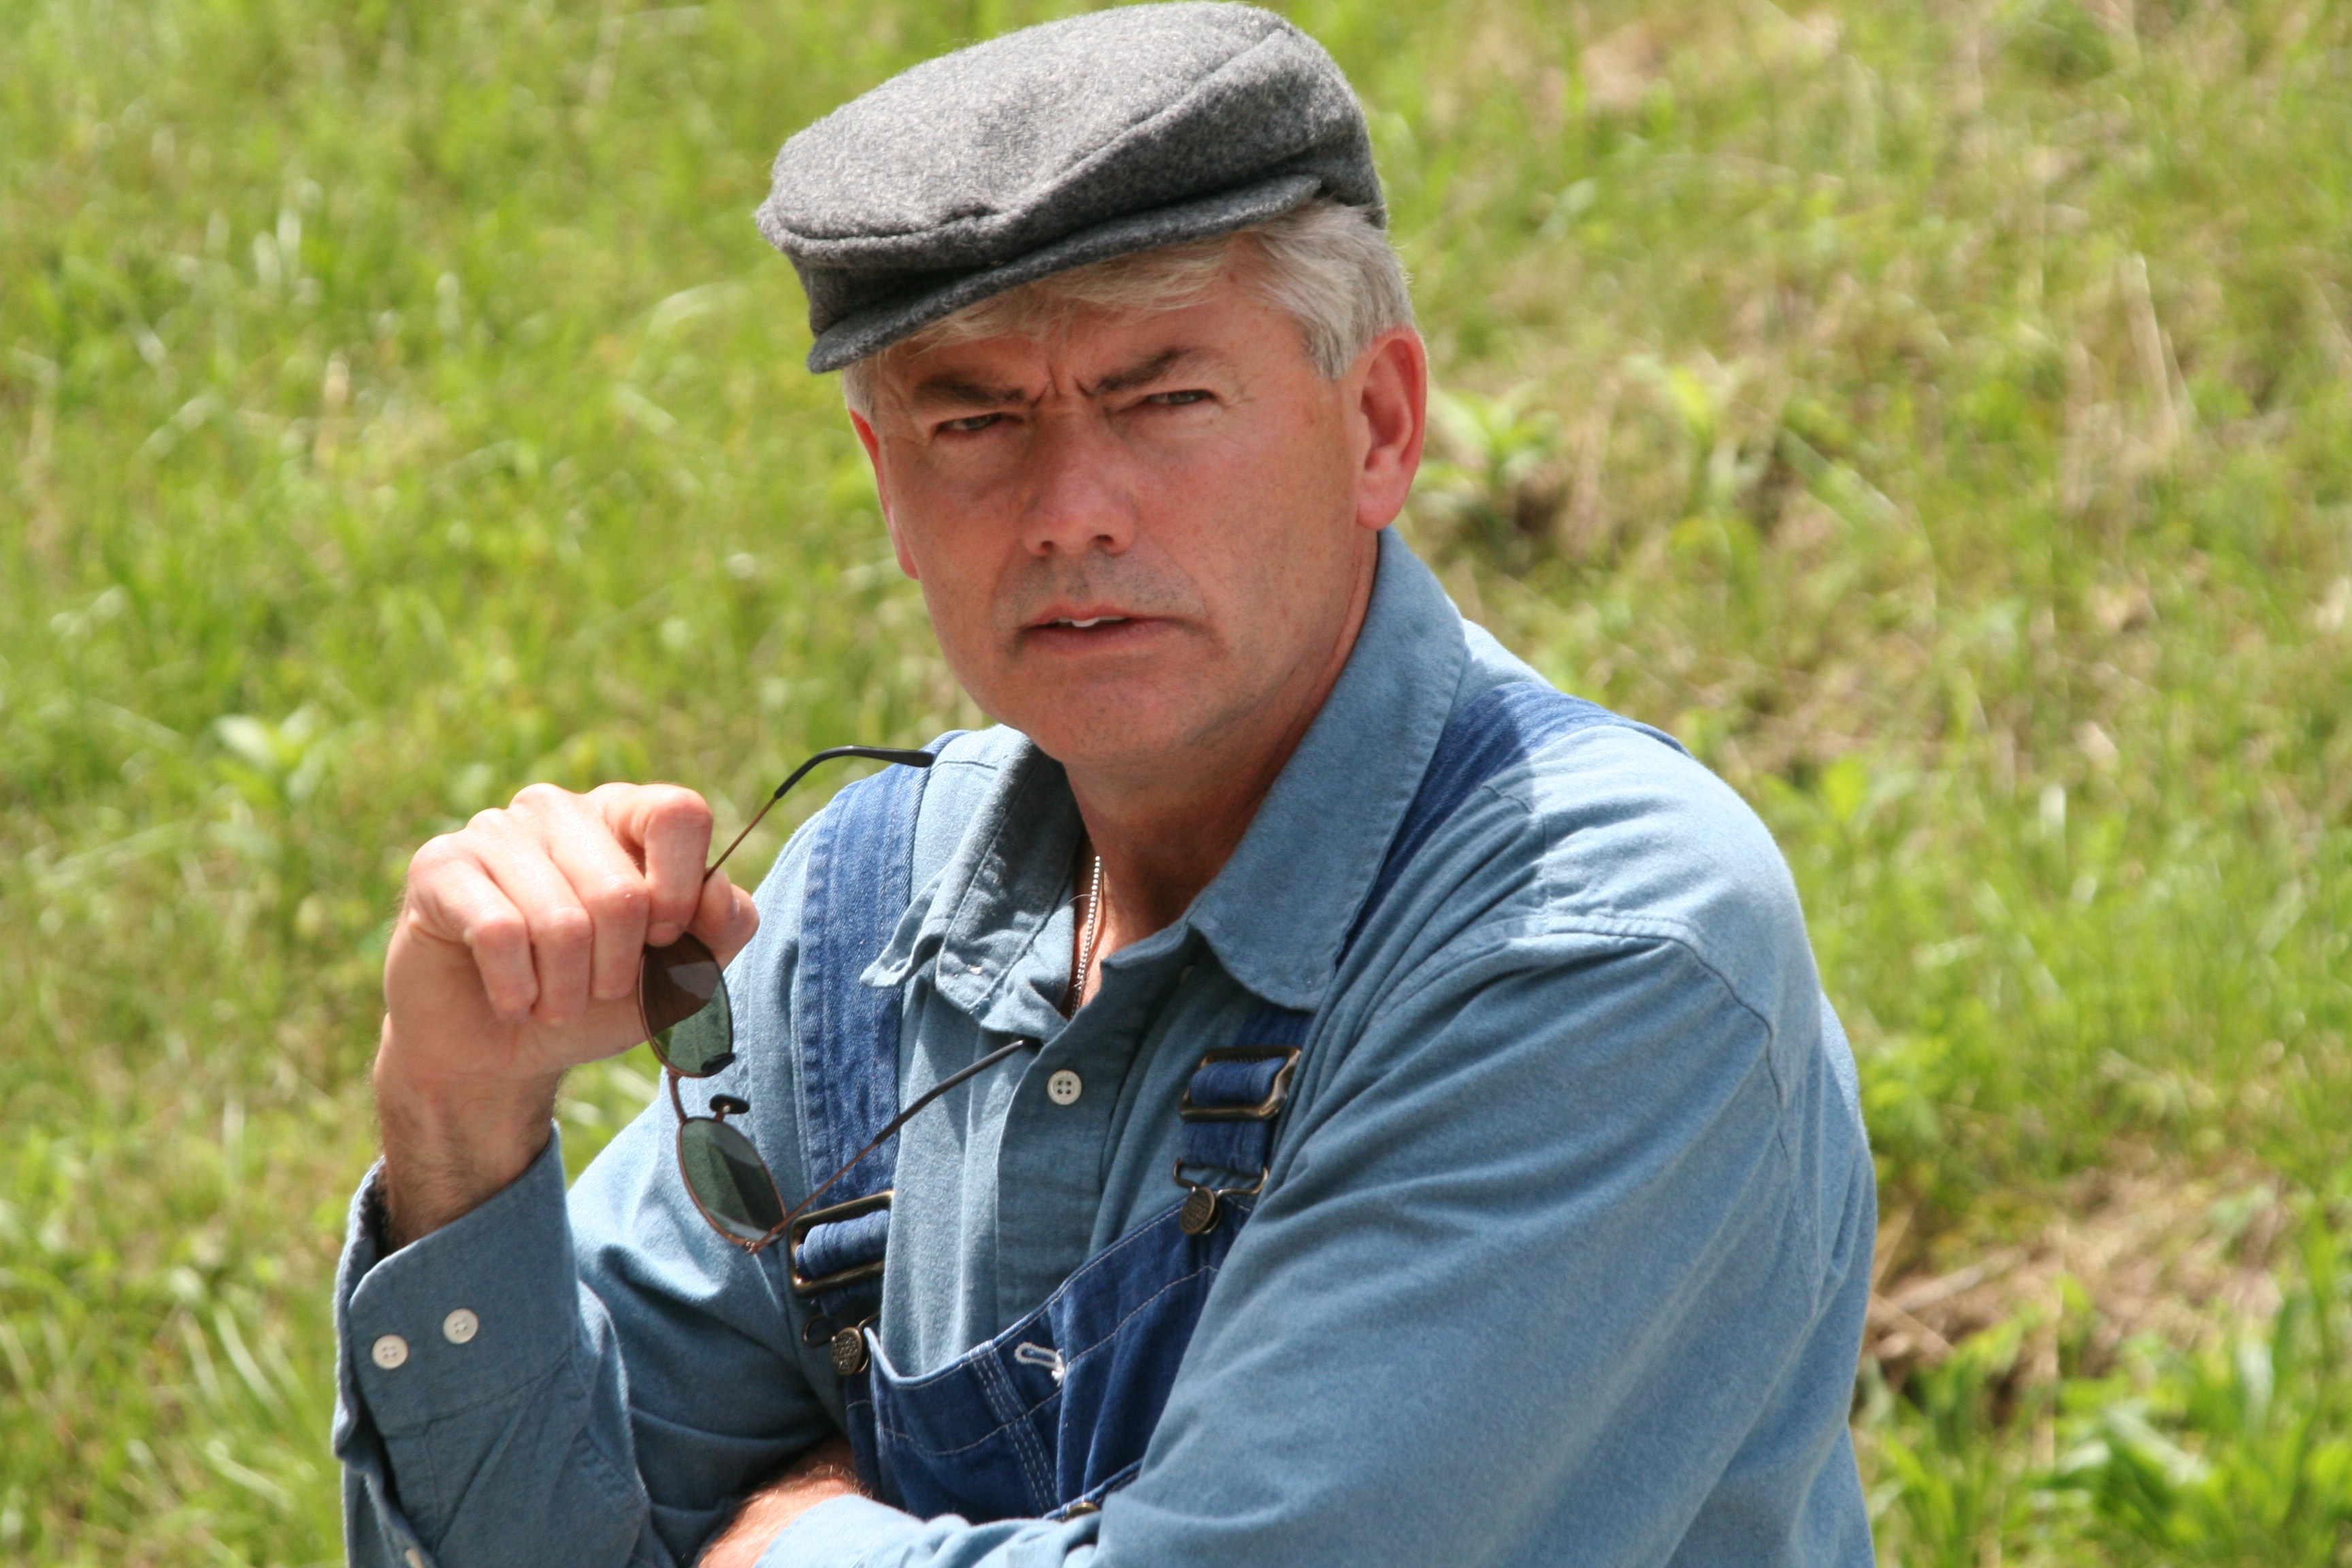 Rick Roberts as a mining supervisor in 